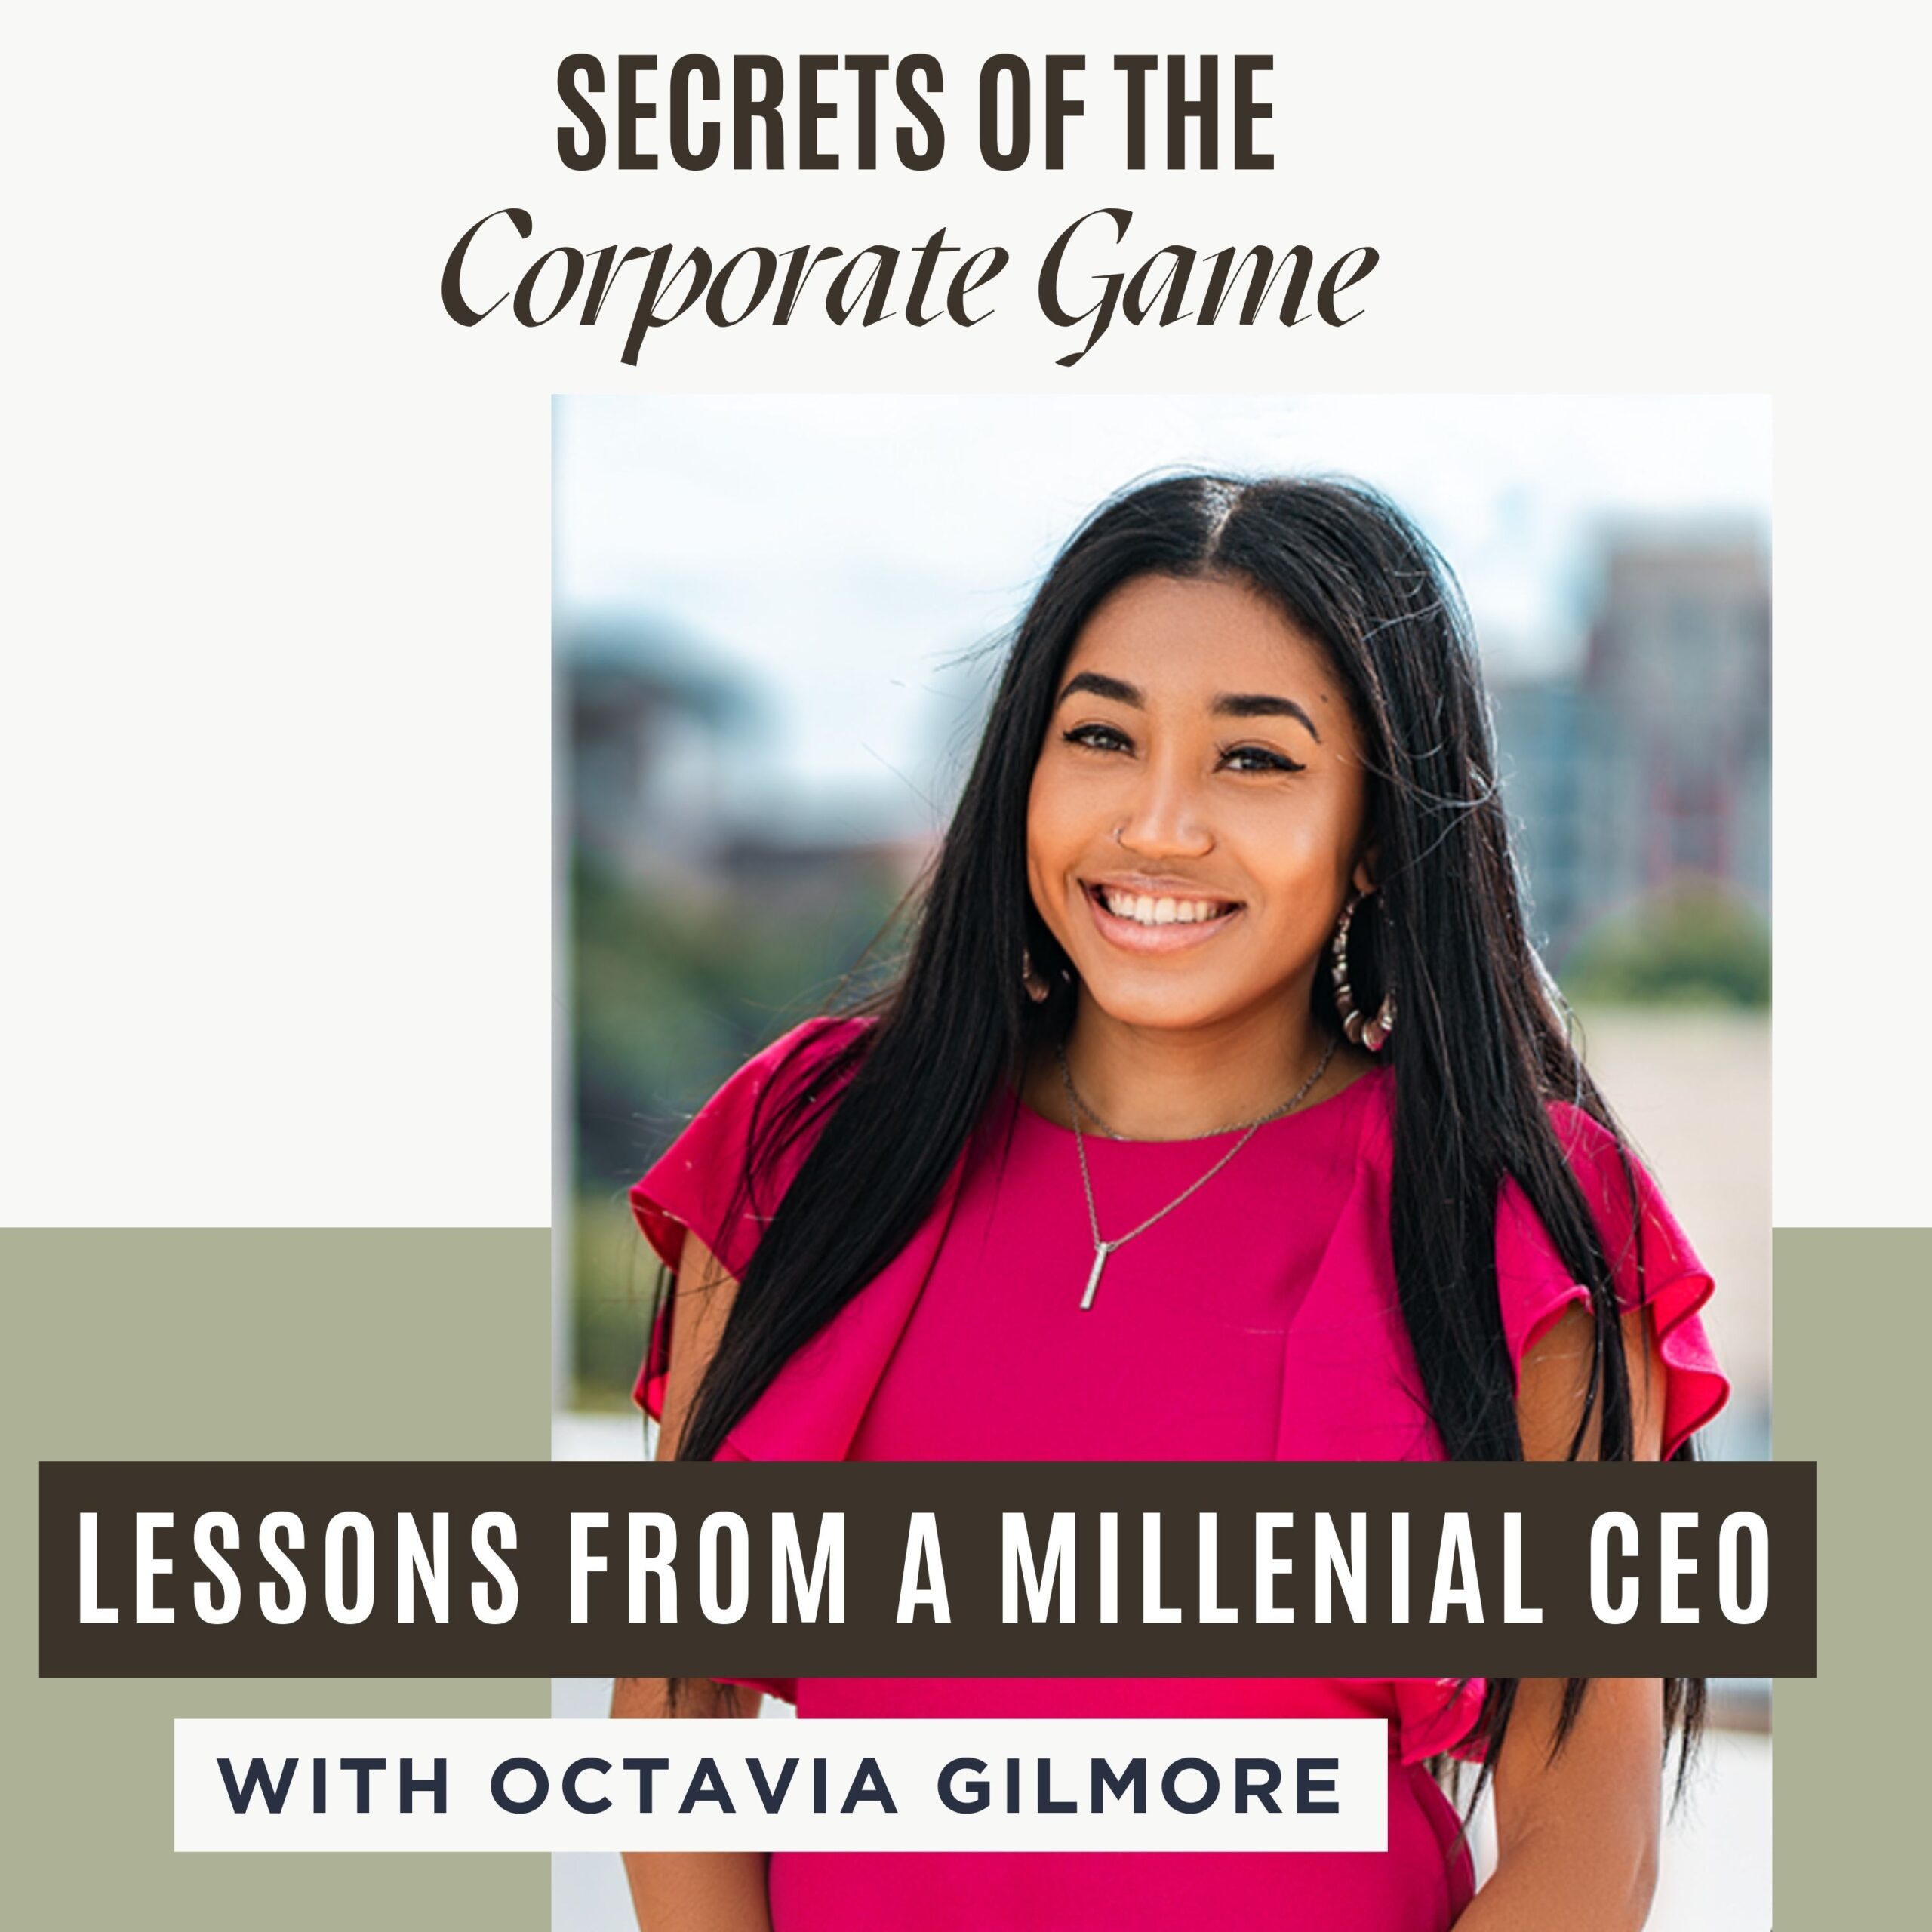 Lessons from a Millennial CEO